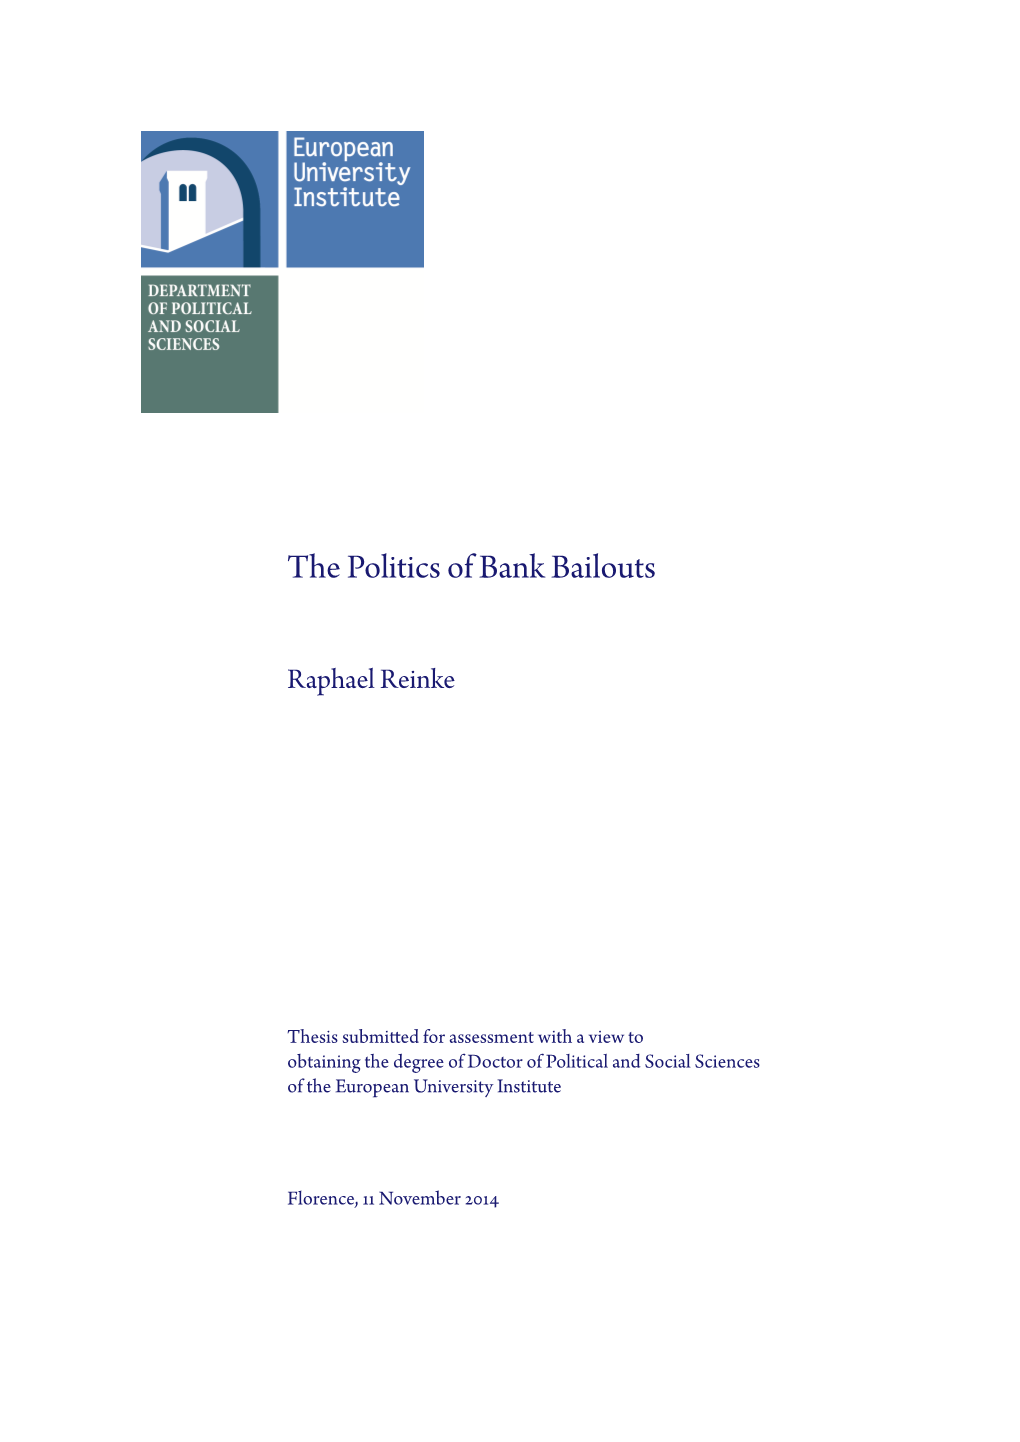 The Politics of Bank Bailouts